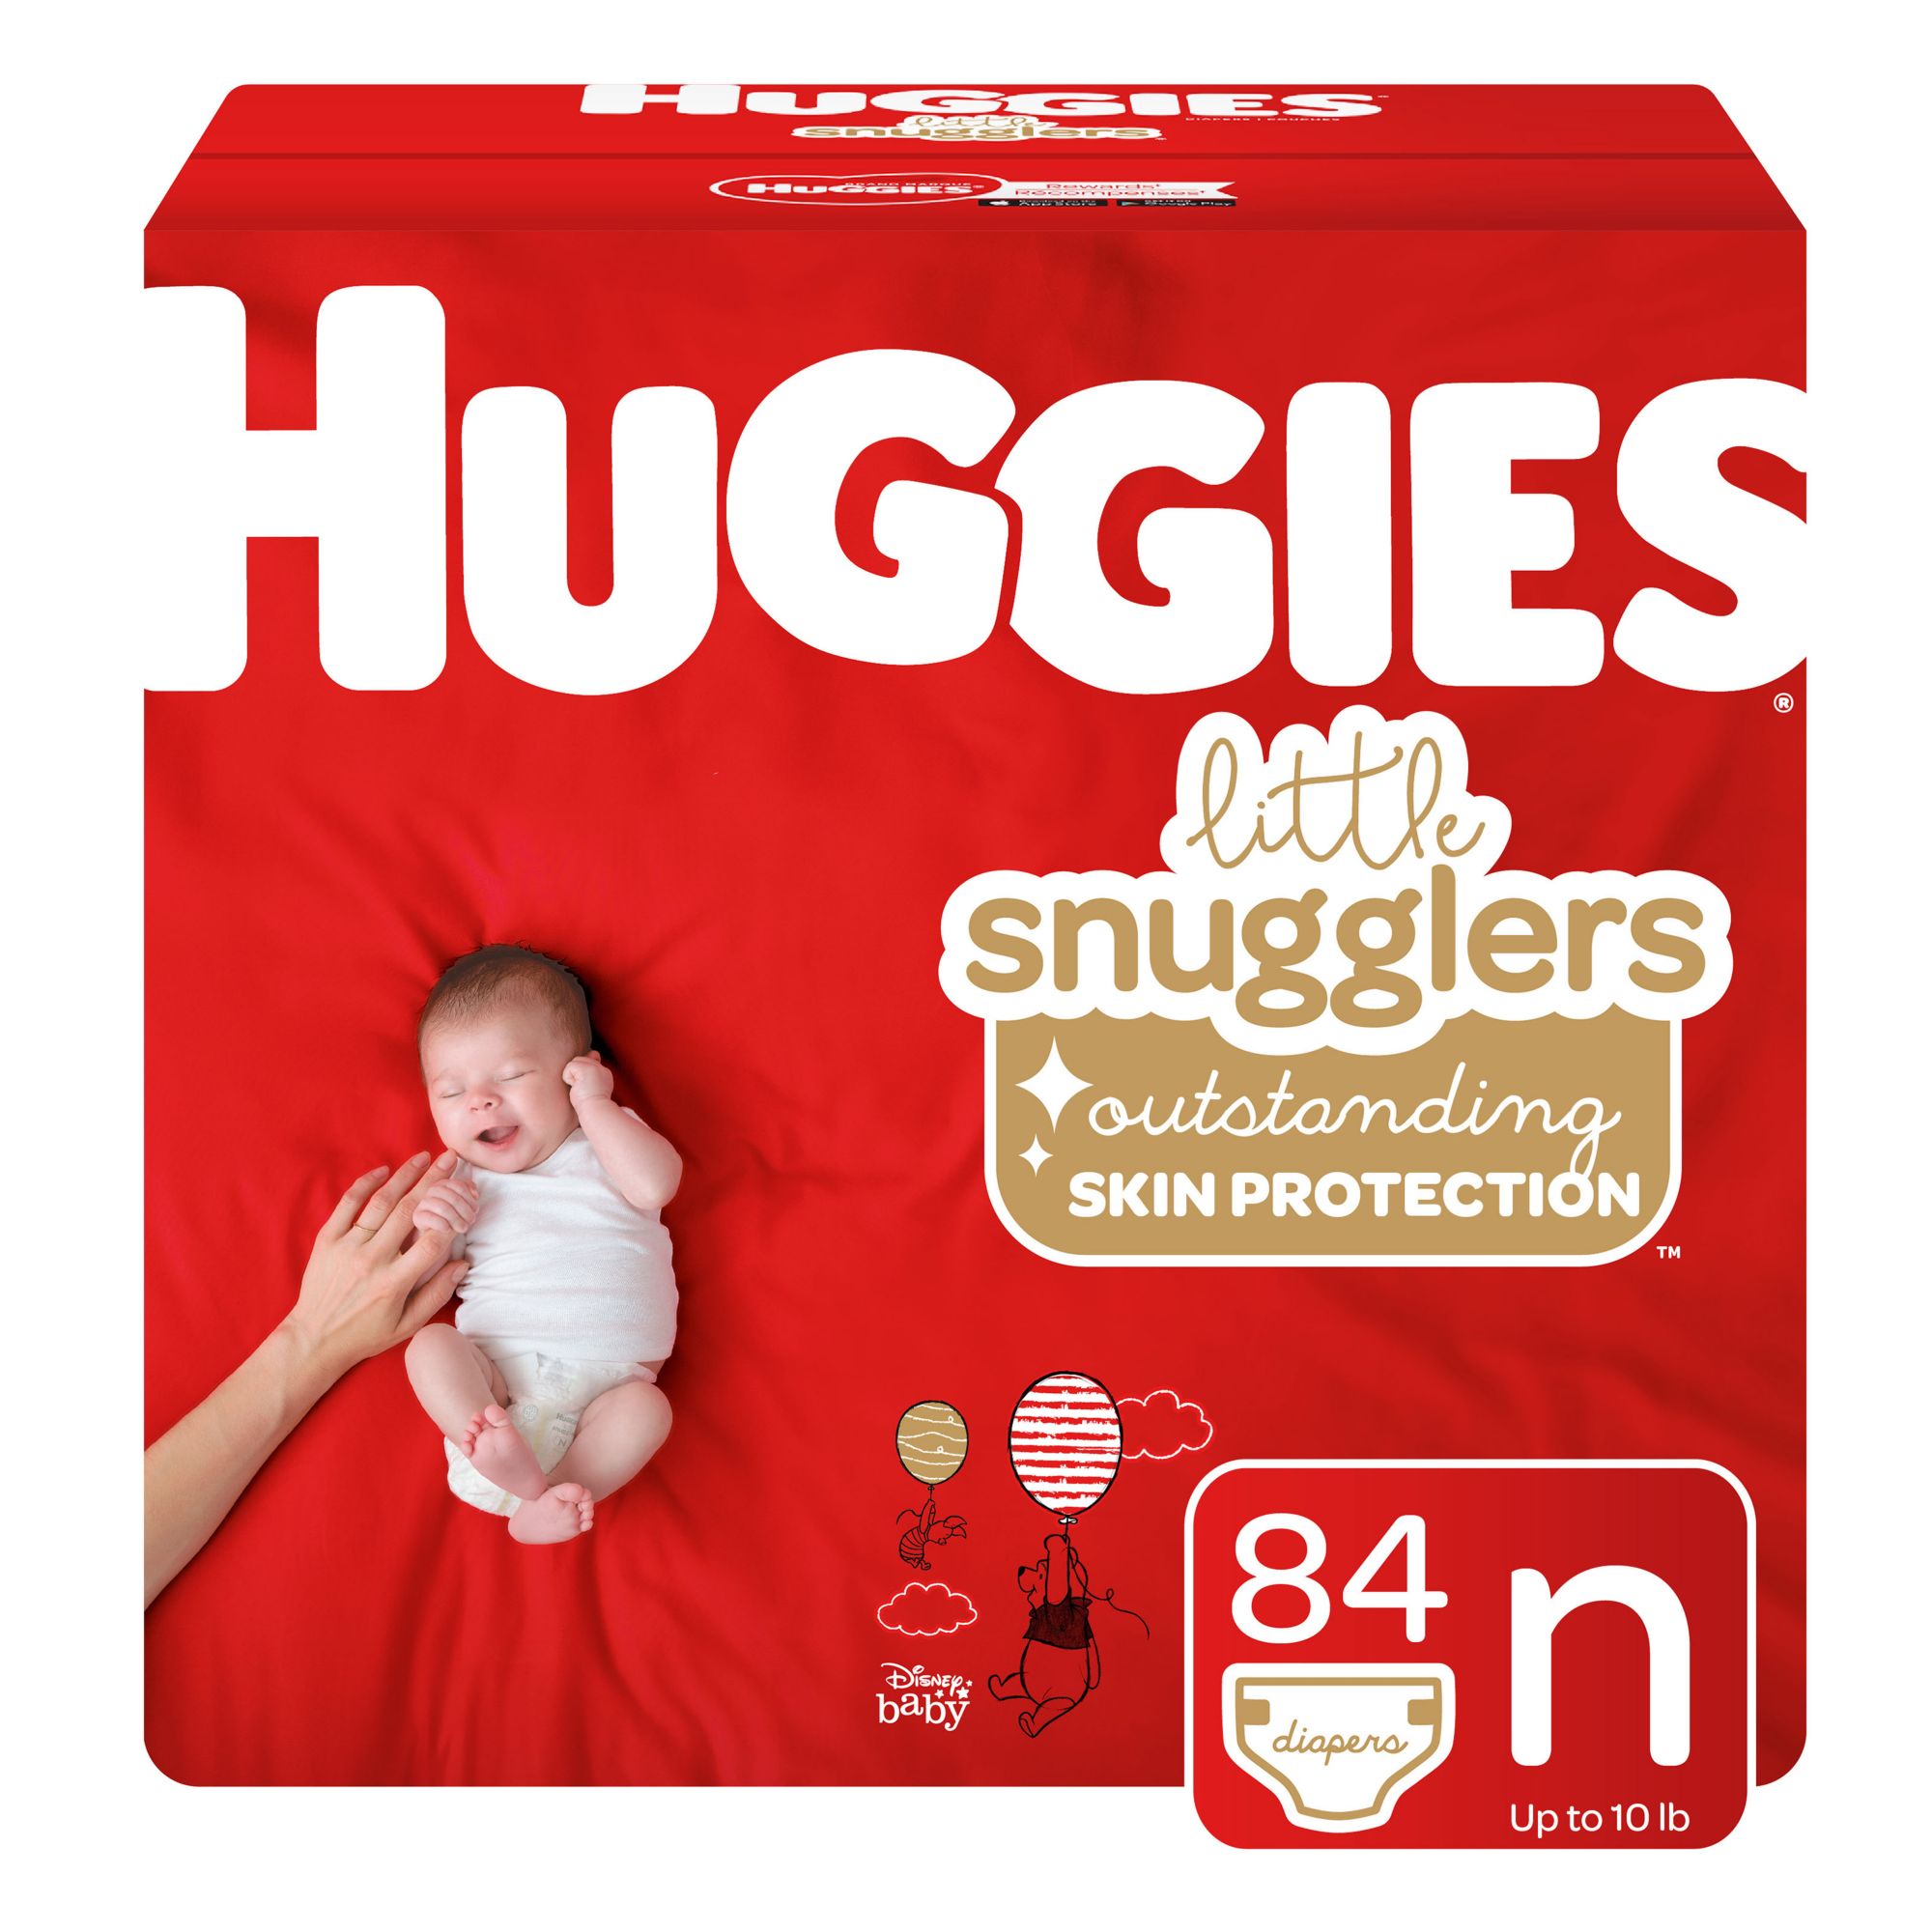 huggies diapers small offers